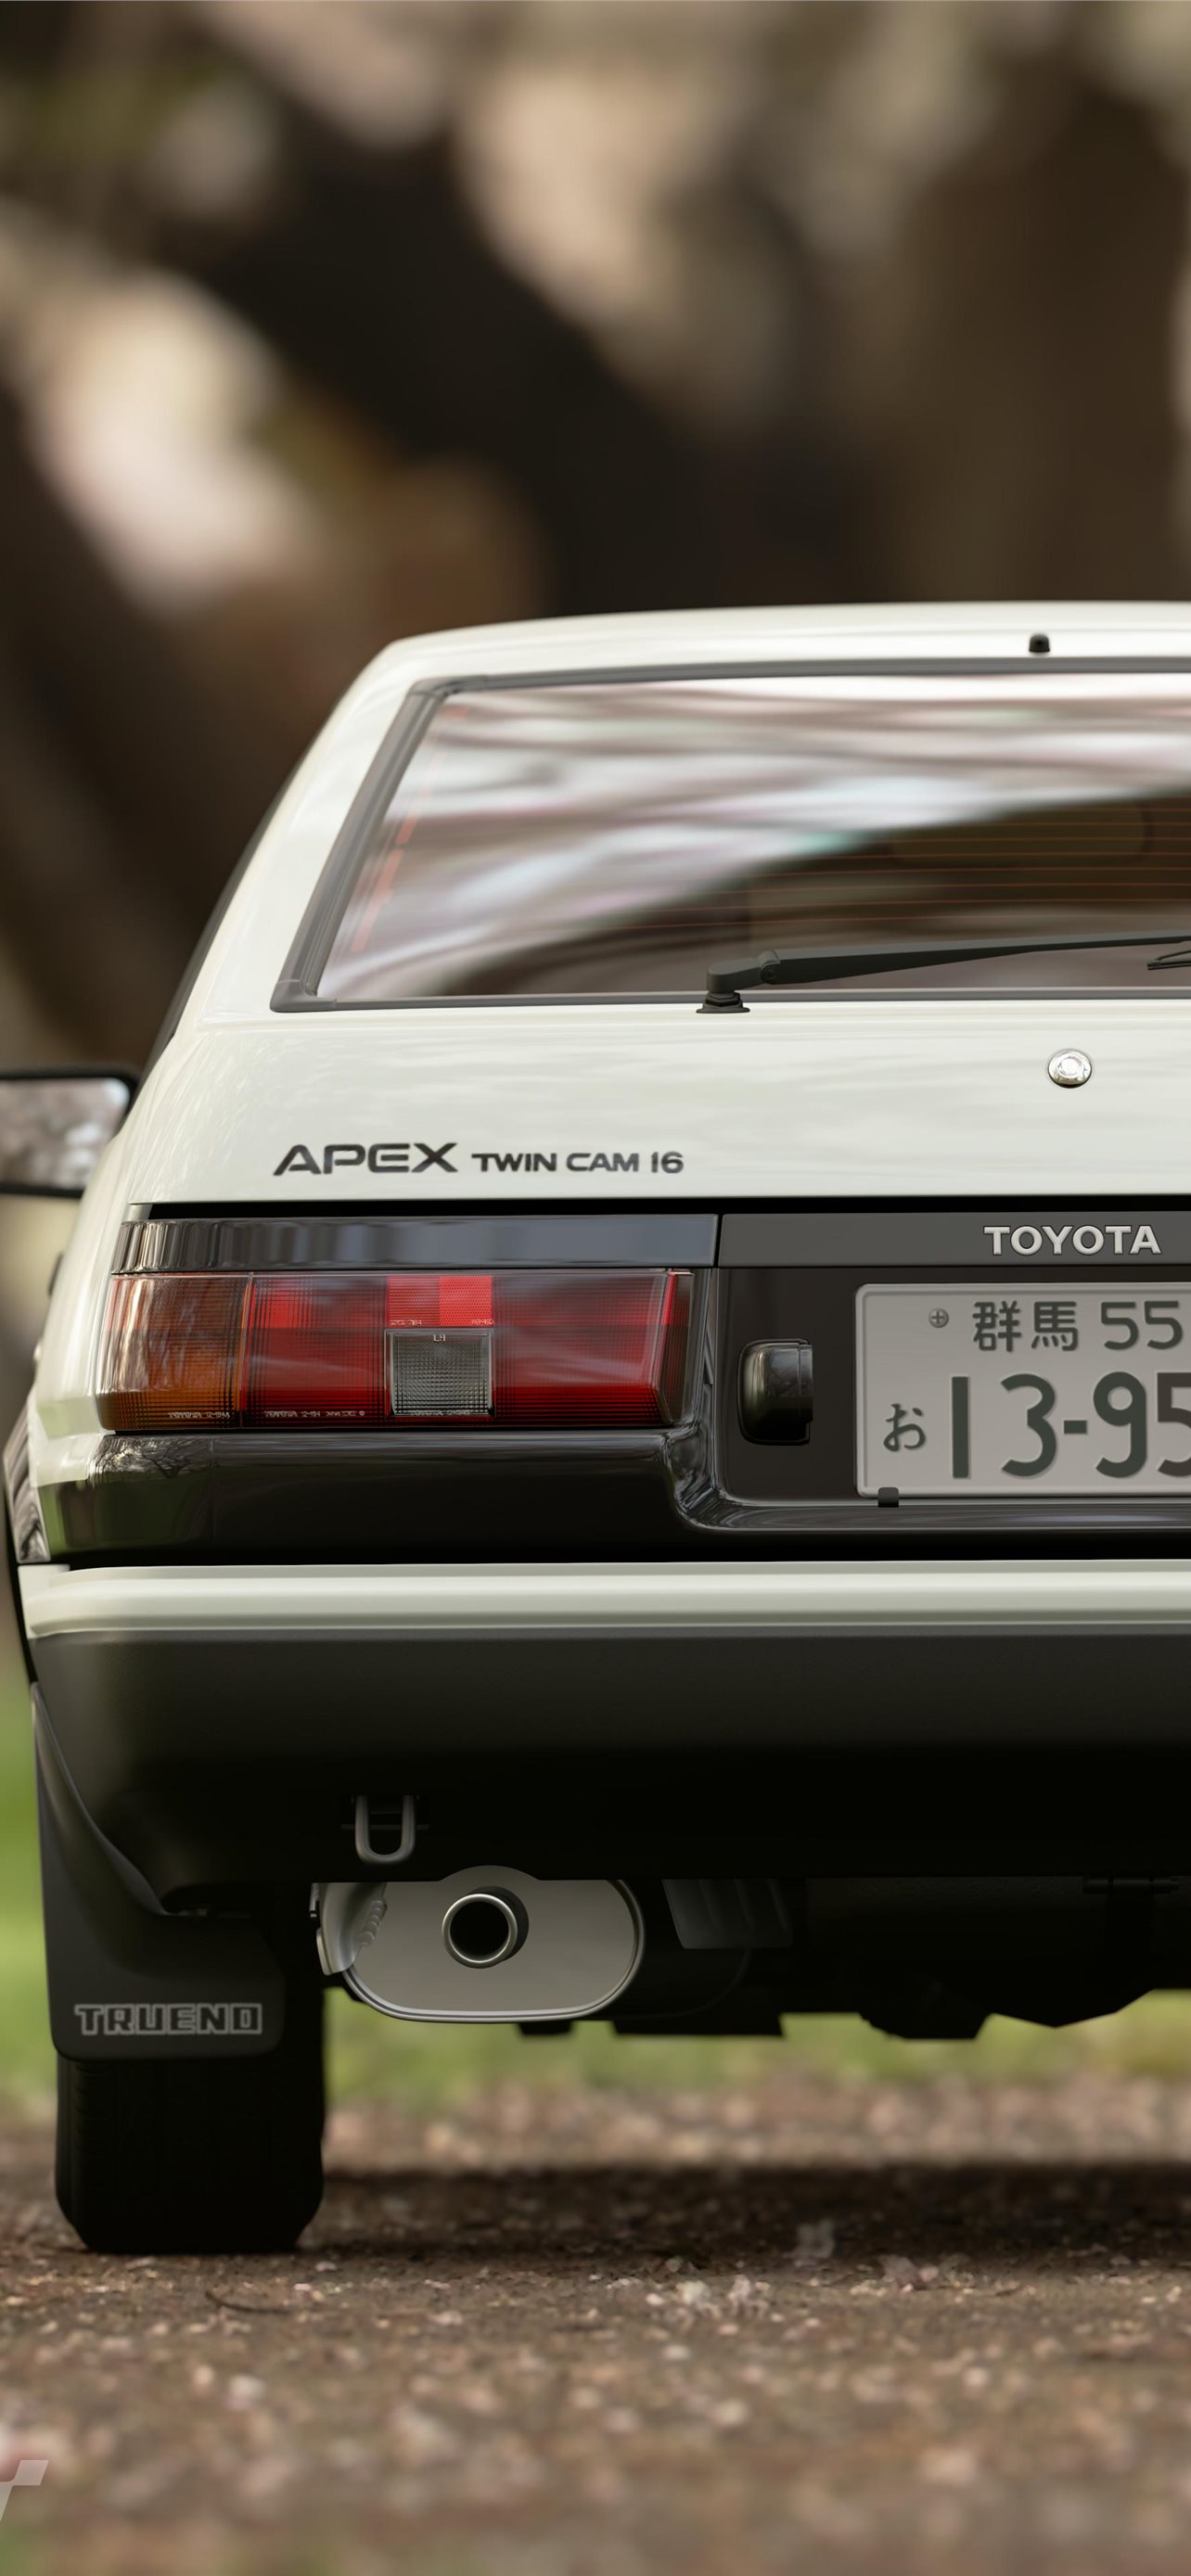 AE86 wallpaper by TypicalFate - Download on ZEDGE™ | 6c8e